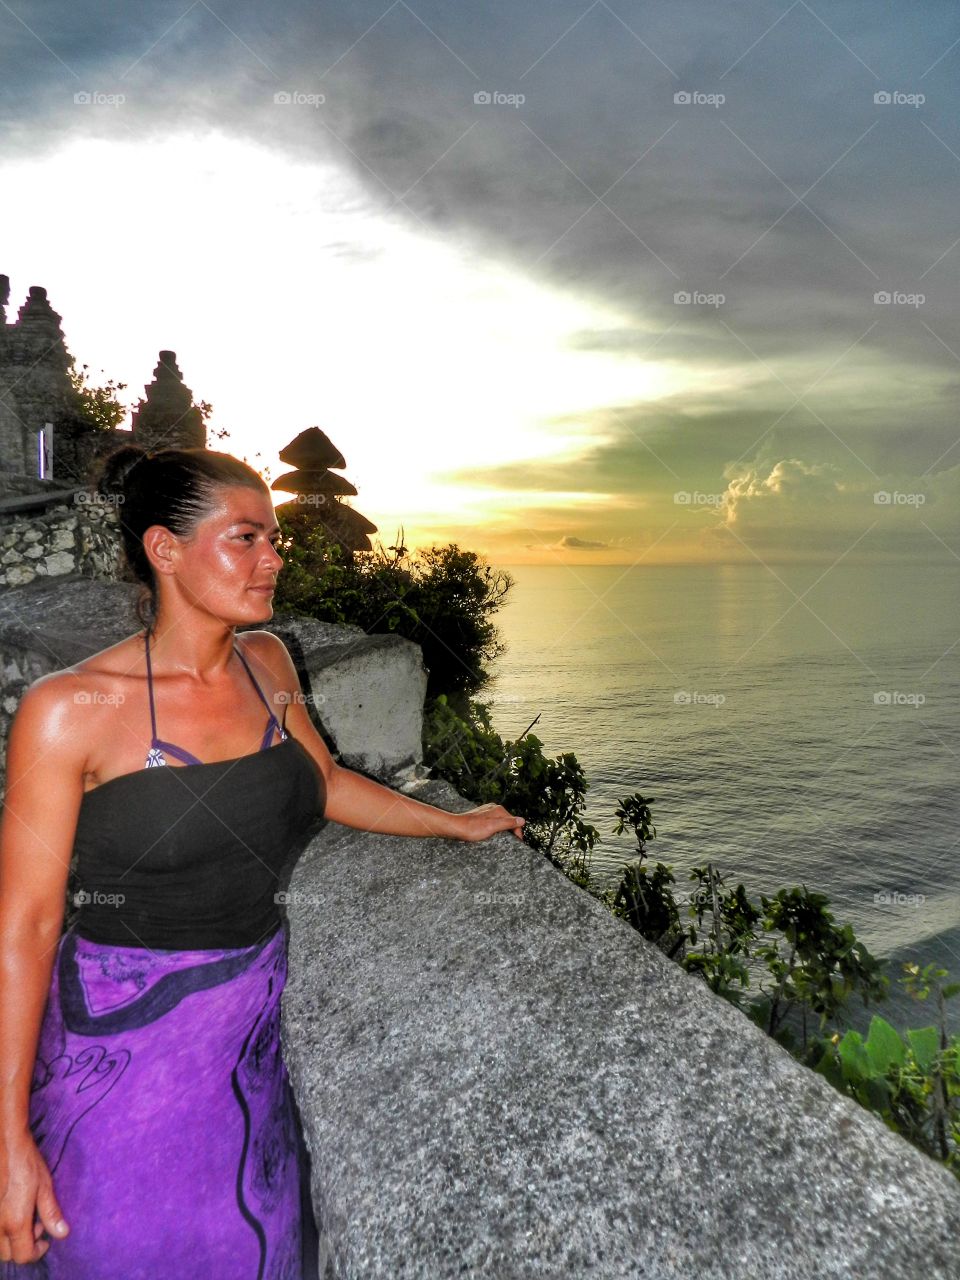 Sunset in a temple in Bali